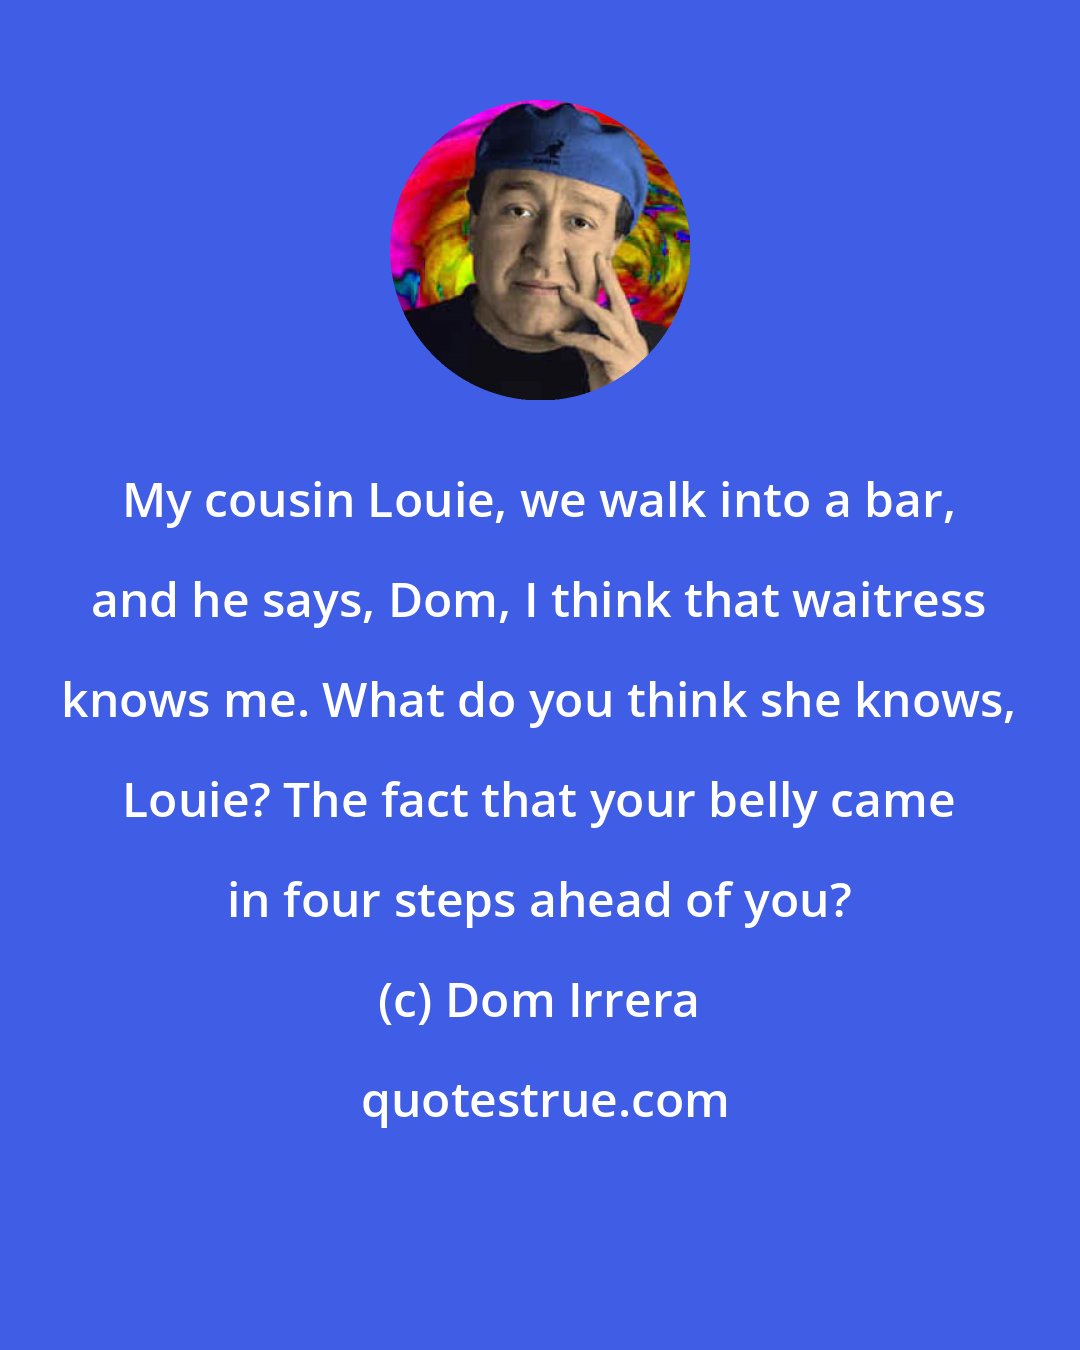 Dom Irrera: My cousin Louie, we walk into a bar, and he says, Dom, I think that waitress knows me. What do you think she knows, Louie? The fact that your belly came in four steps ahead of you?